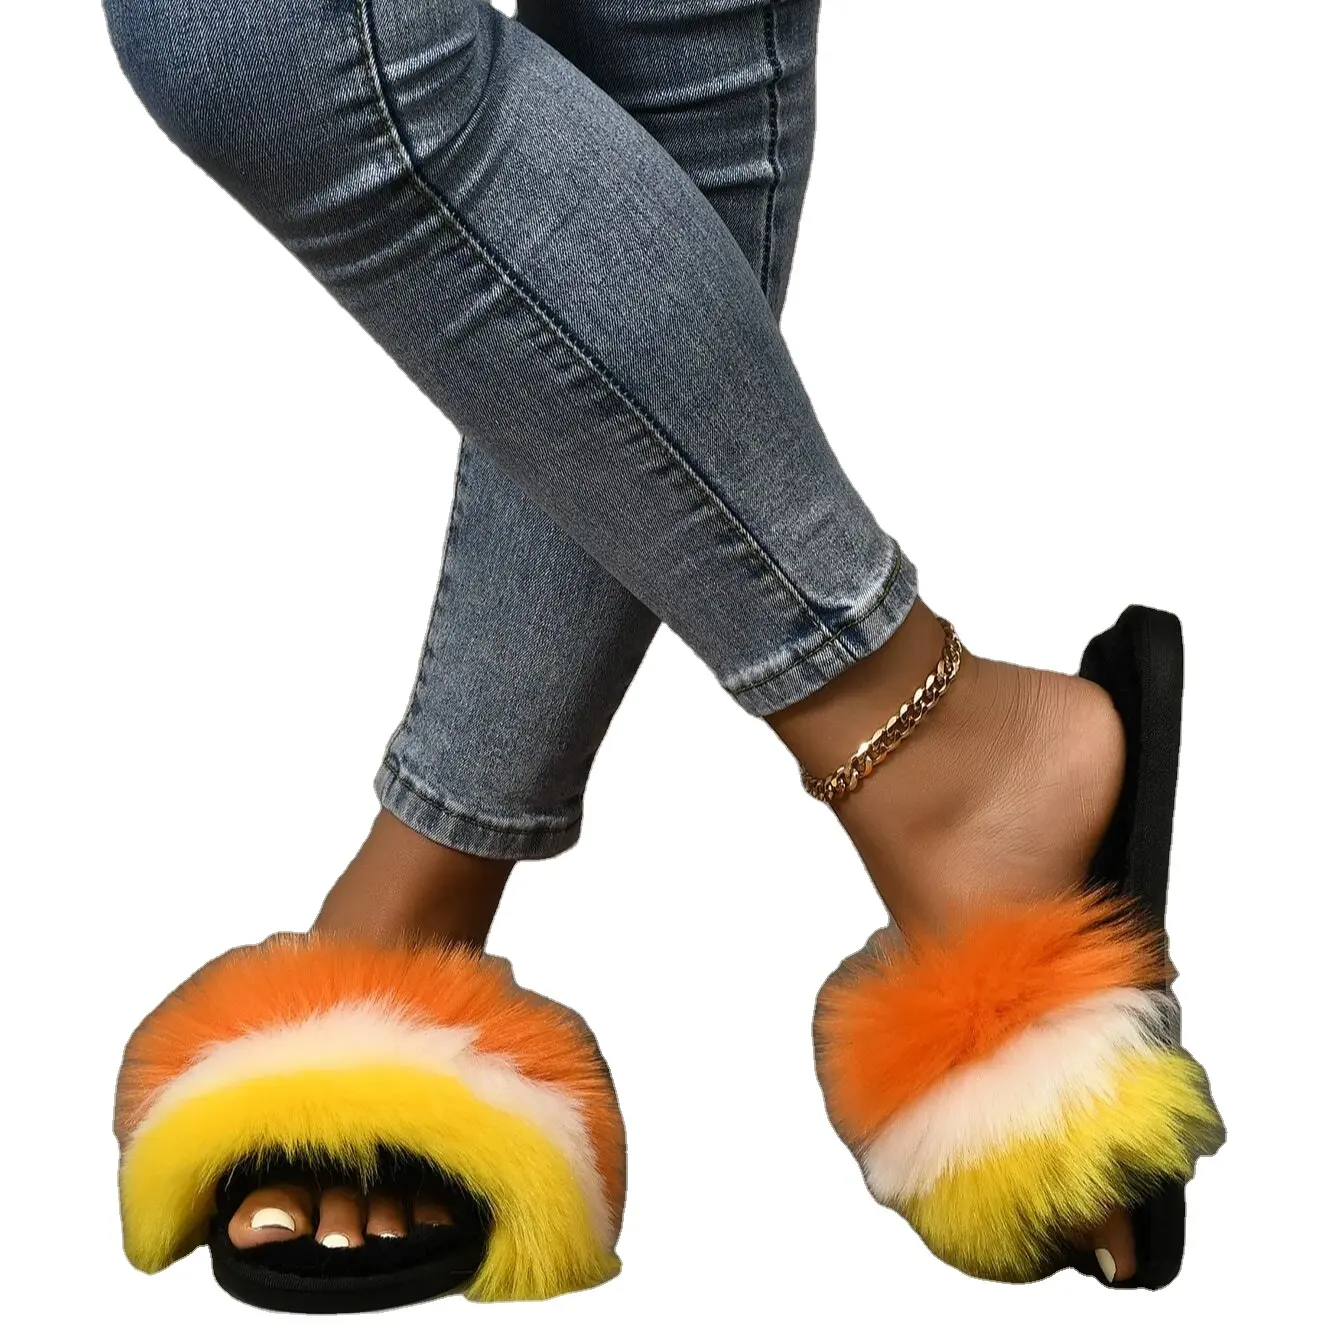 Colorful Fluffy Bedroom Slippers Woman Slipper PVC Material Woman Slides Suitable Wear Outdoor With Fur On The Upper